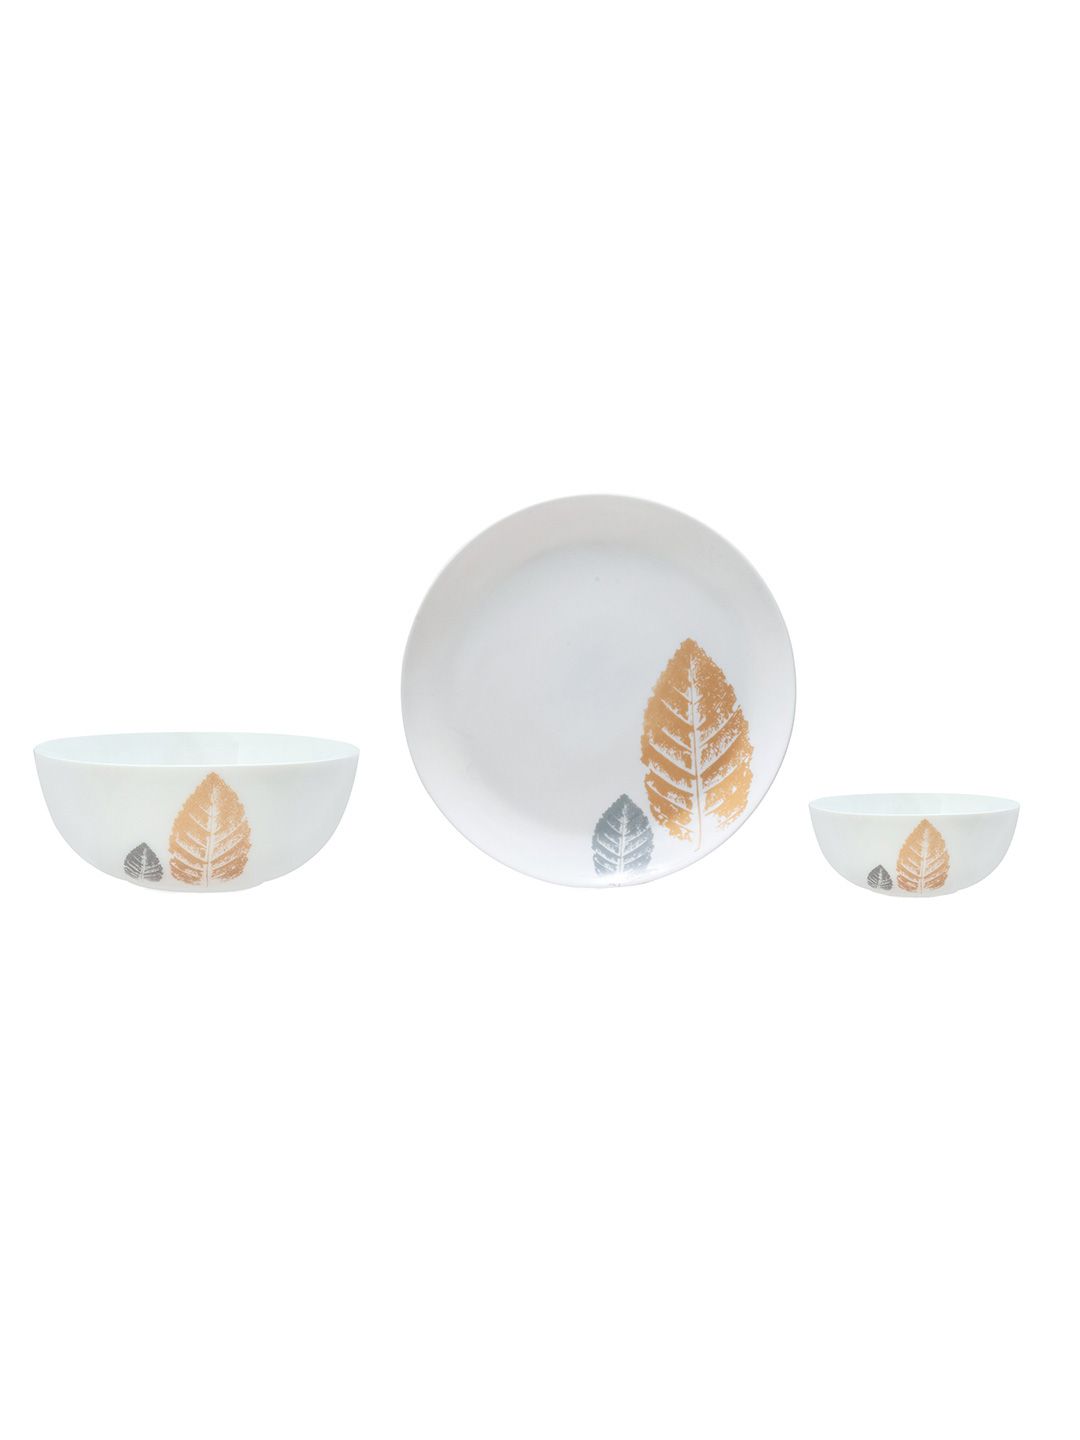 Athome by Nilkamal White & Mustard 14 Pieces Floral Stainless Steel Dinner Set Price in India